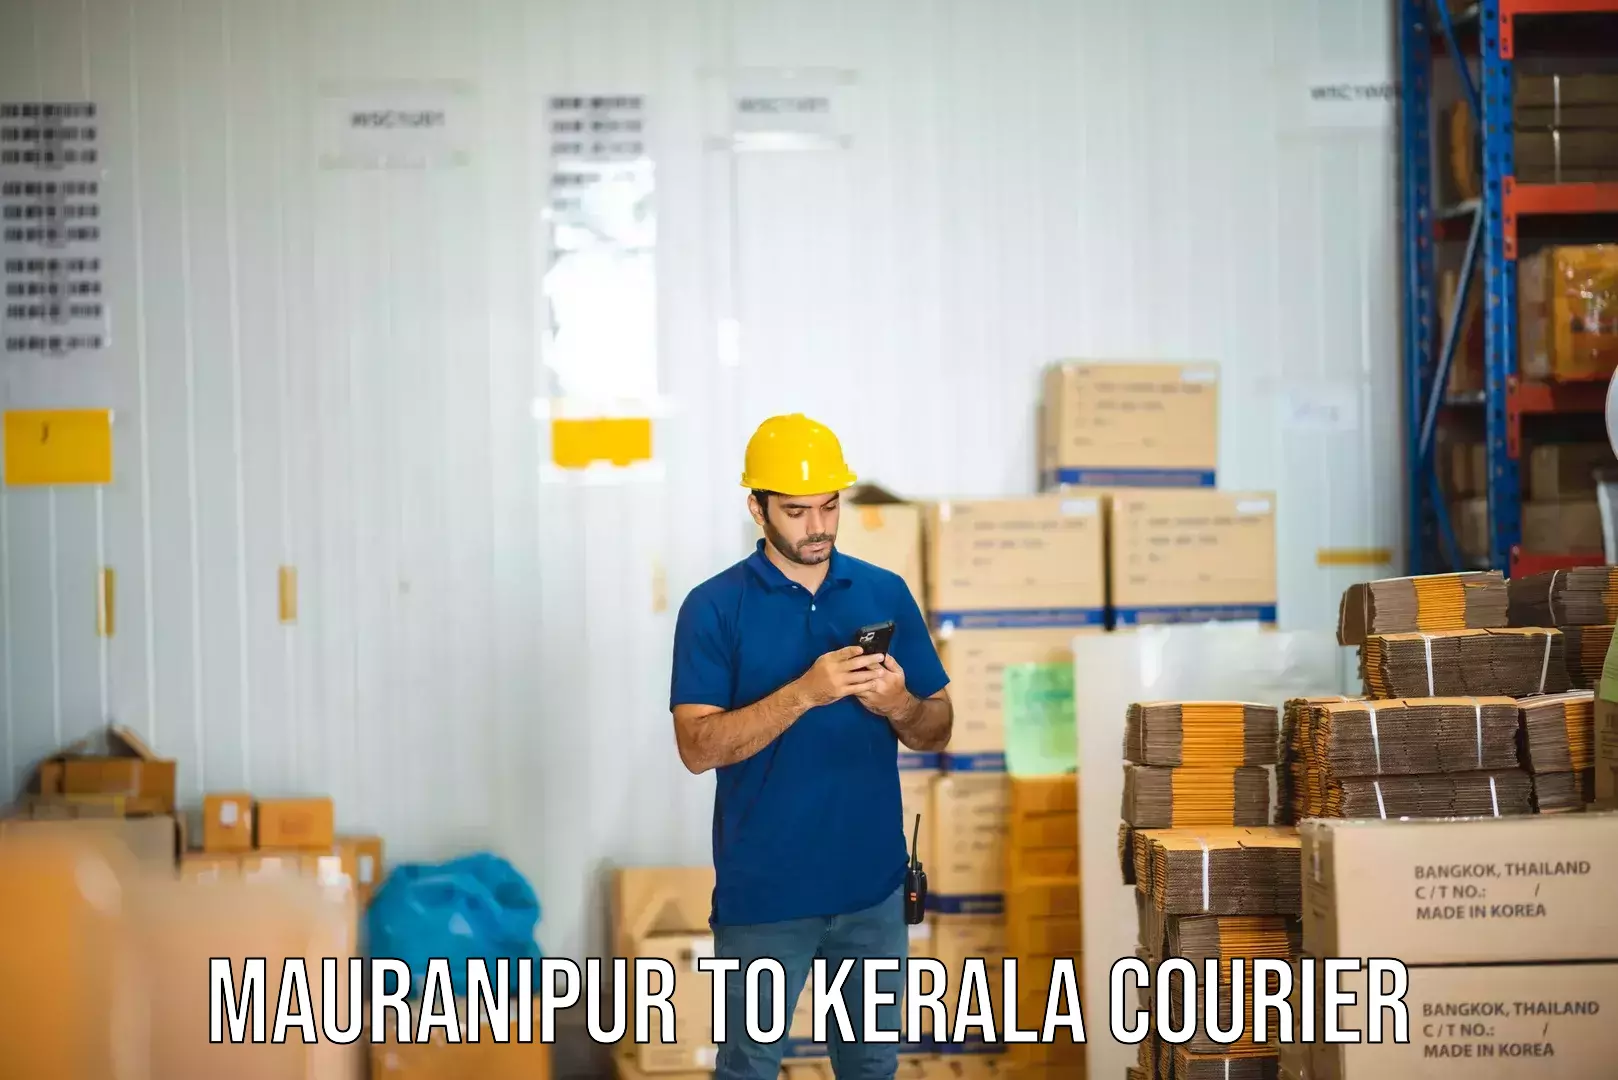 Comprehensive shipping network Mauranipur to Kerala